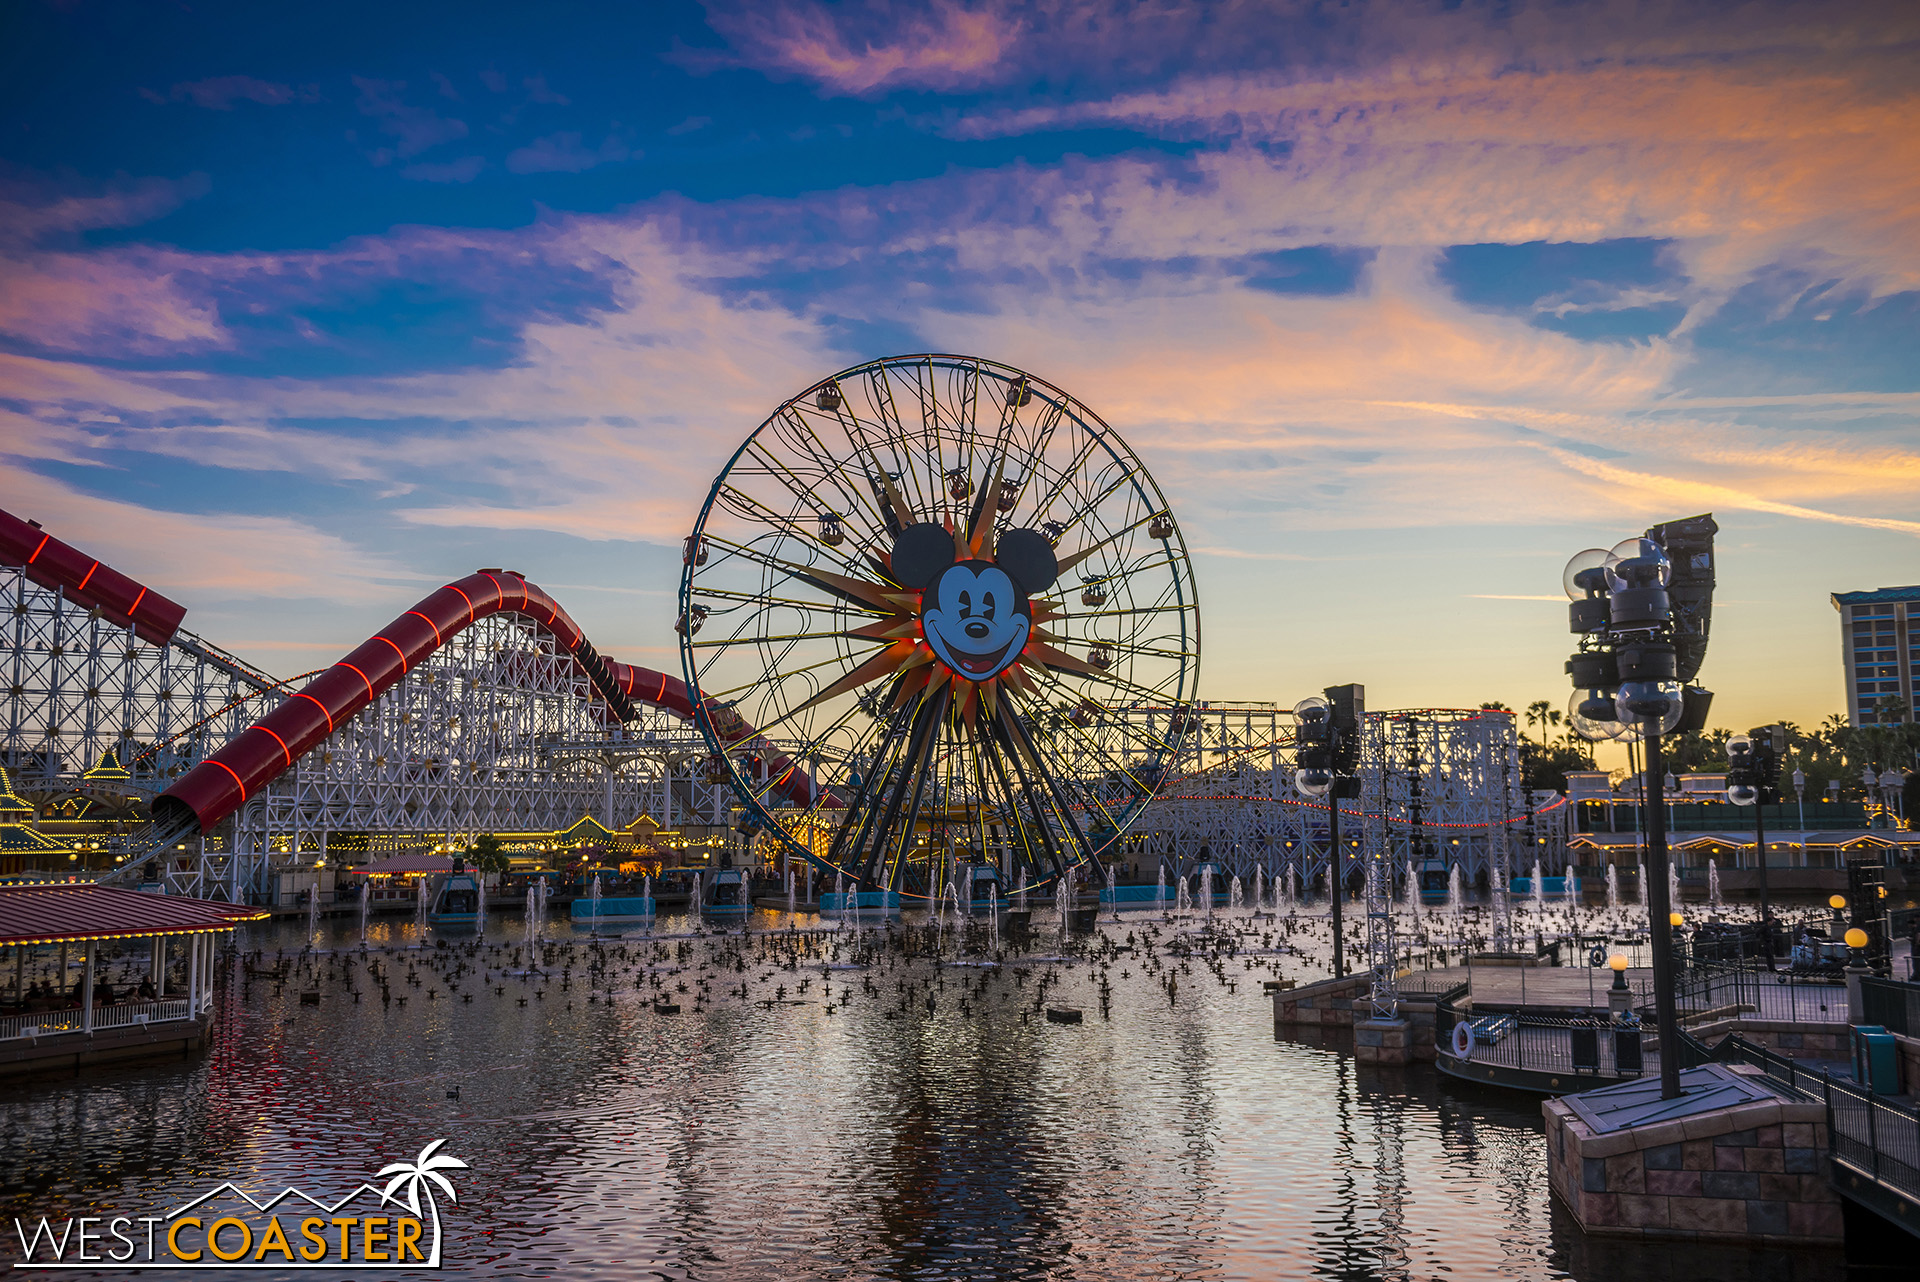  Nice sunset and the world as a Carousel of Color.   